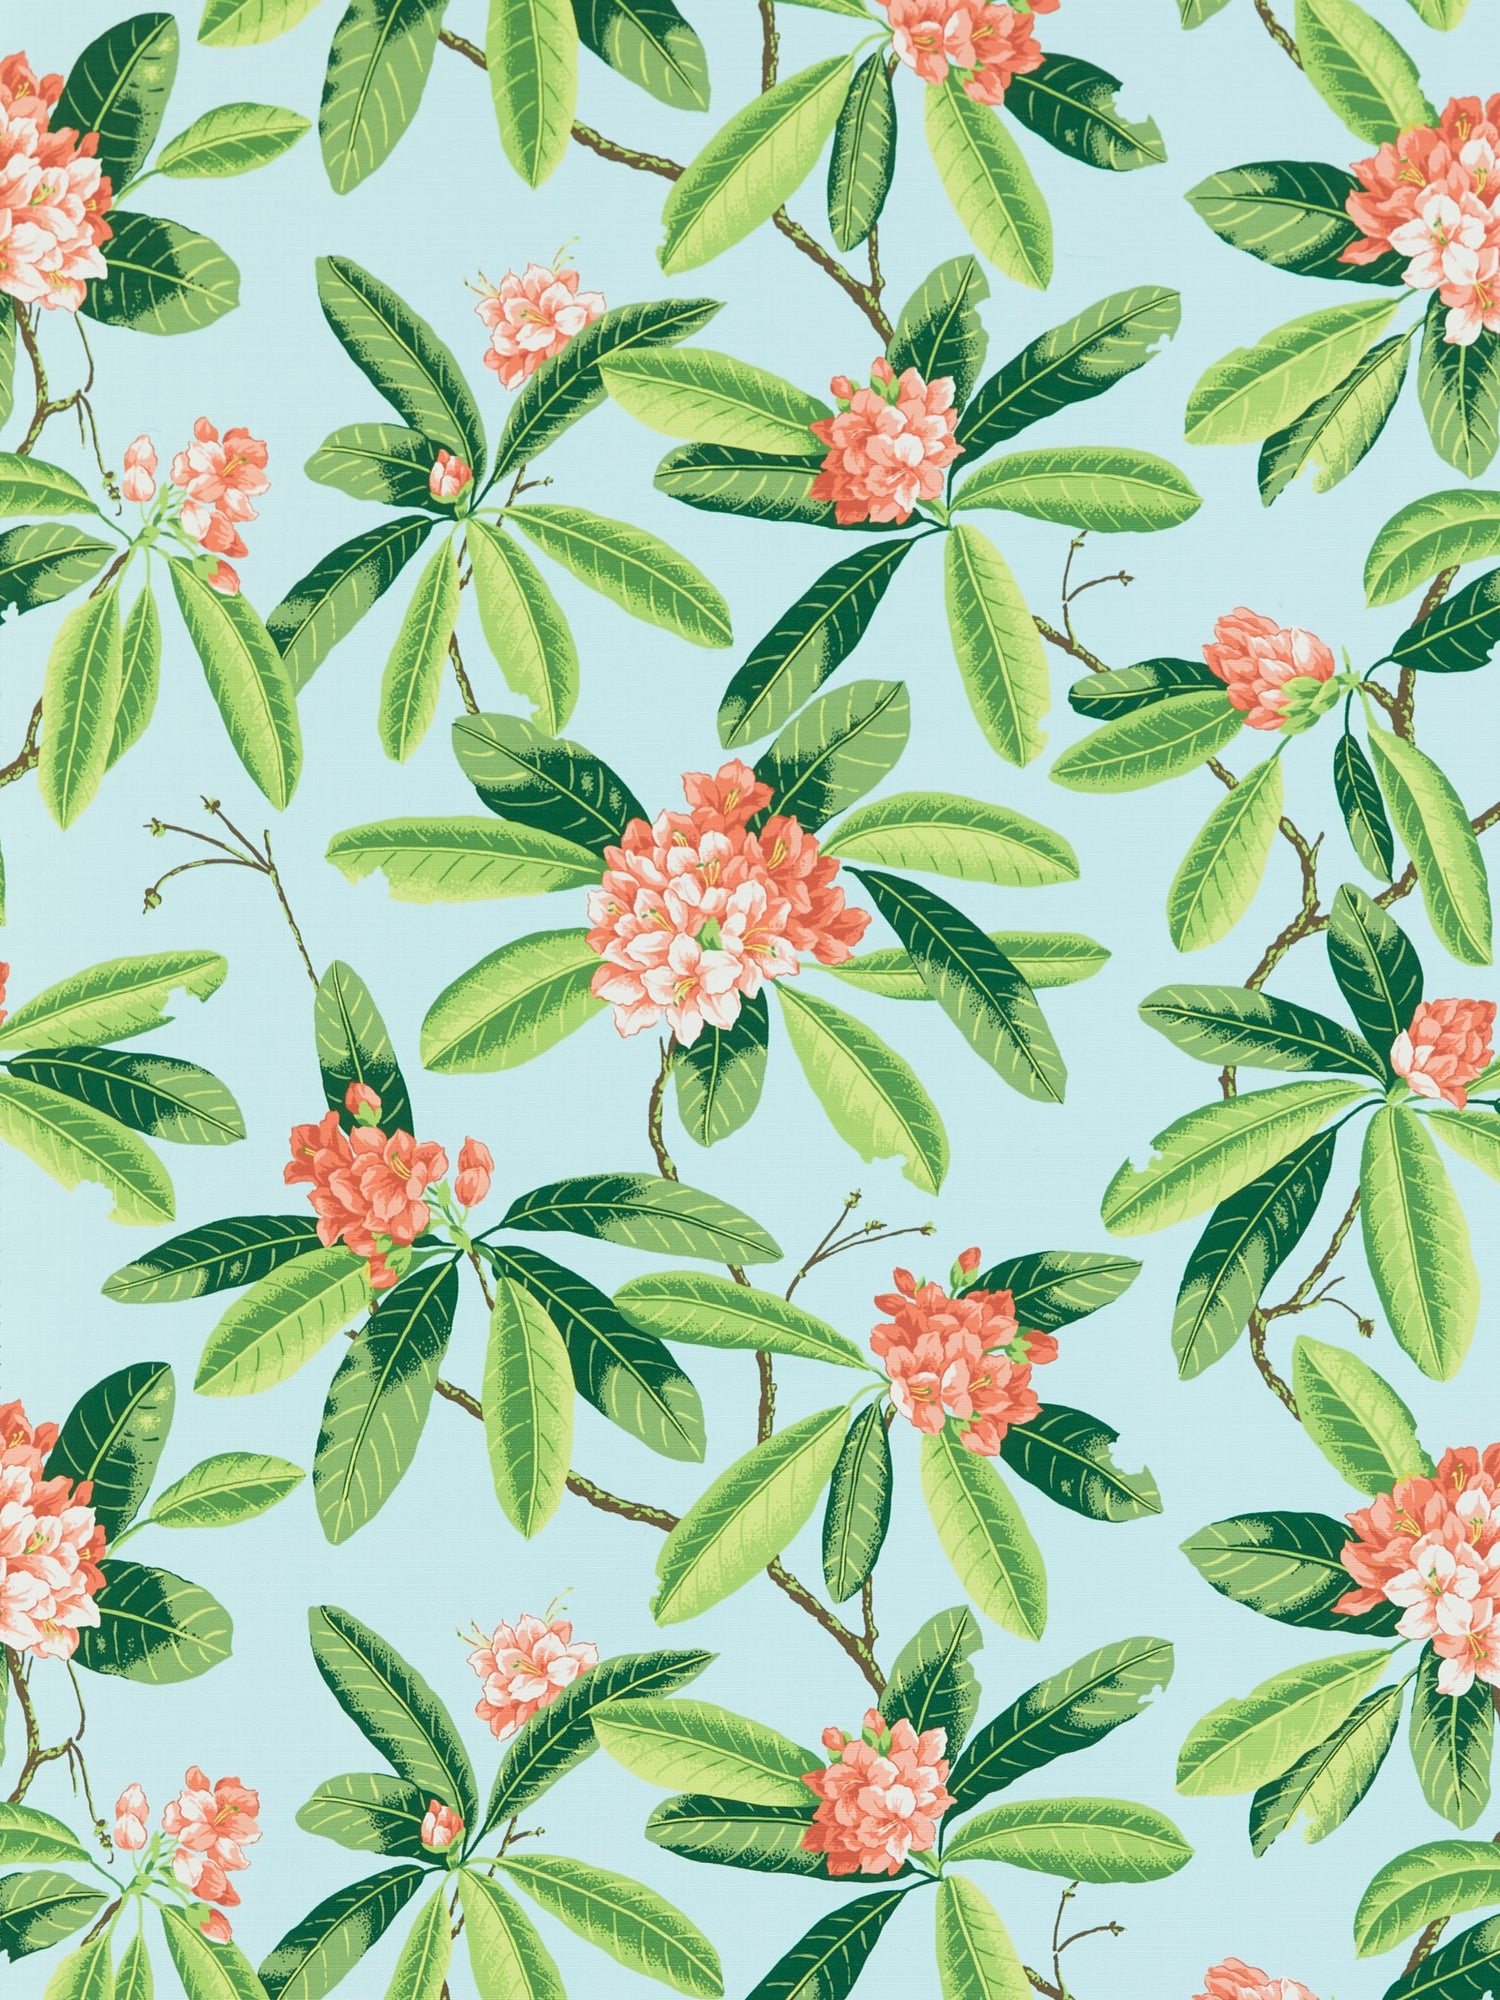 Rhododendron Outdoor fabric in coral on aqua color - pattern number SC 000316454M - by Scalamandre in the Scalamandre Fabrics Book 1 collection